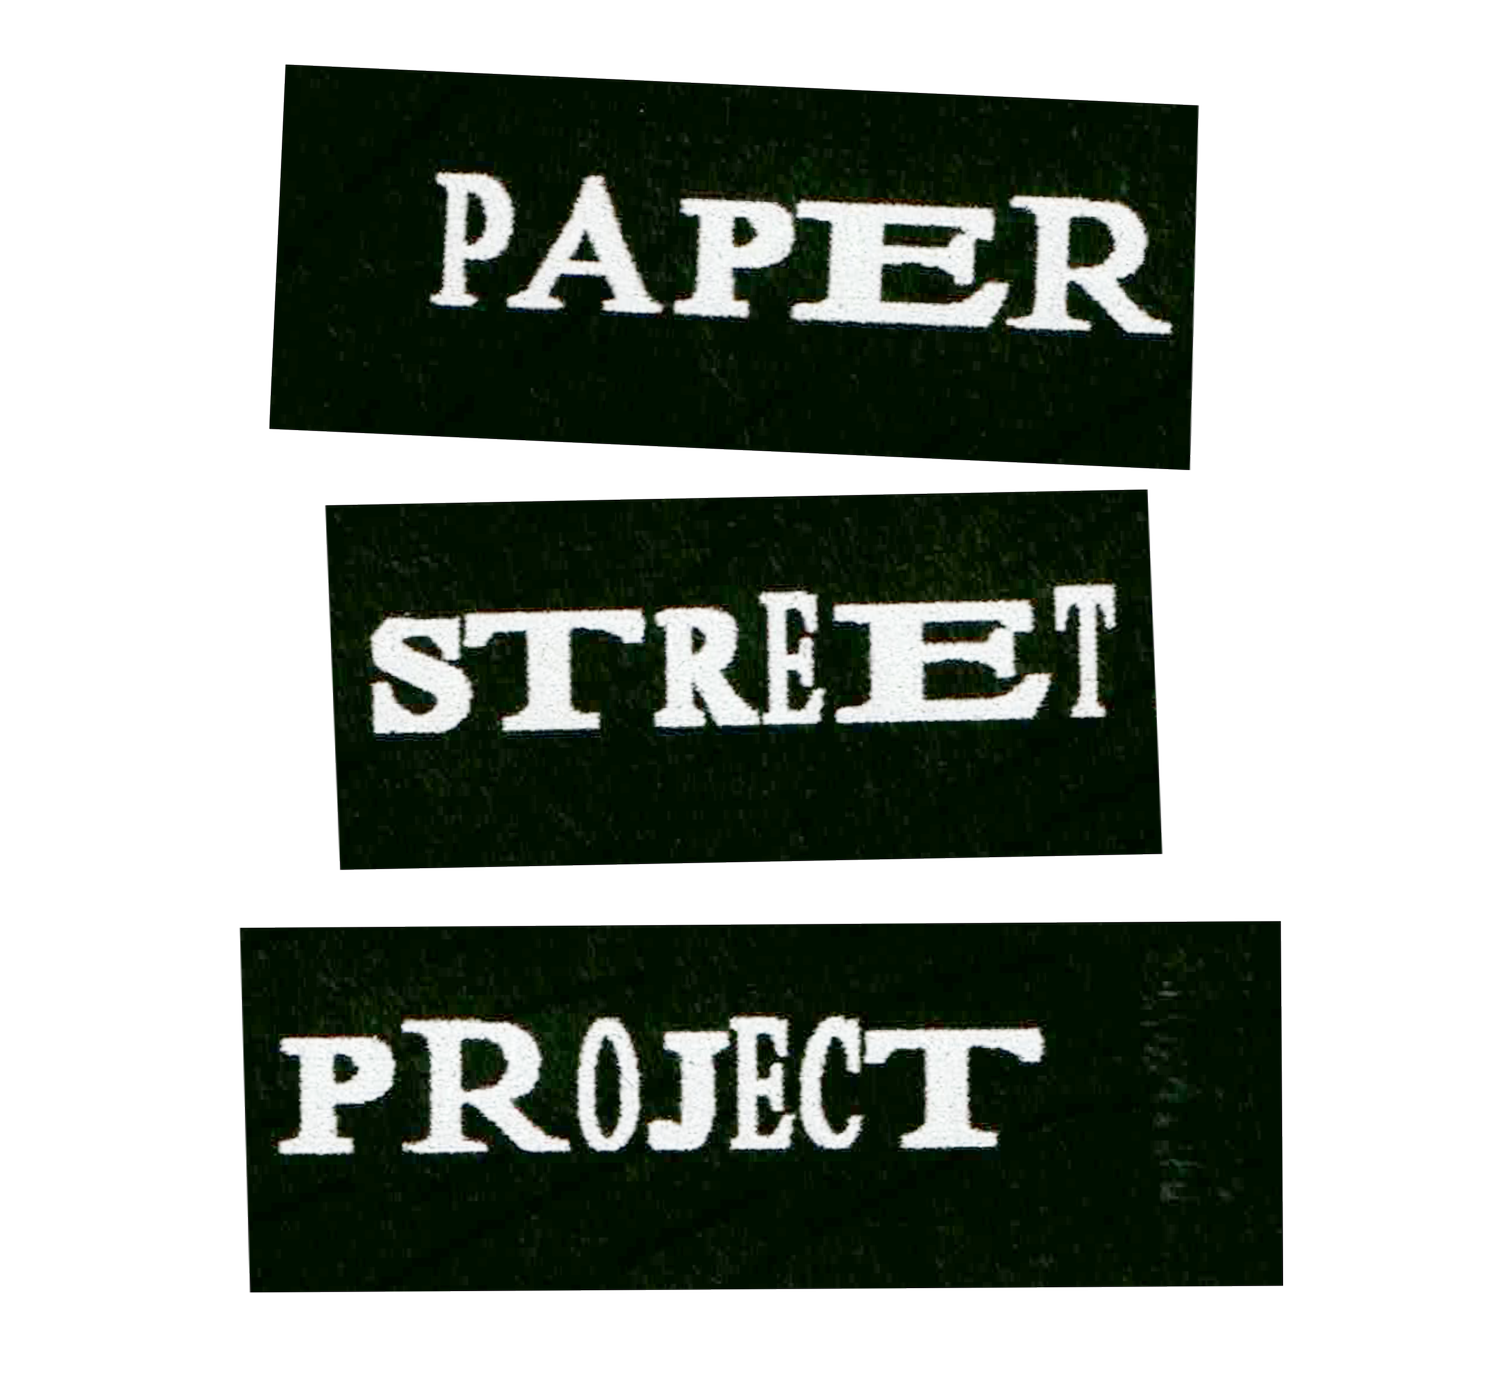 Paper Street Project